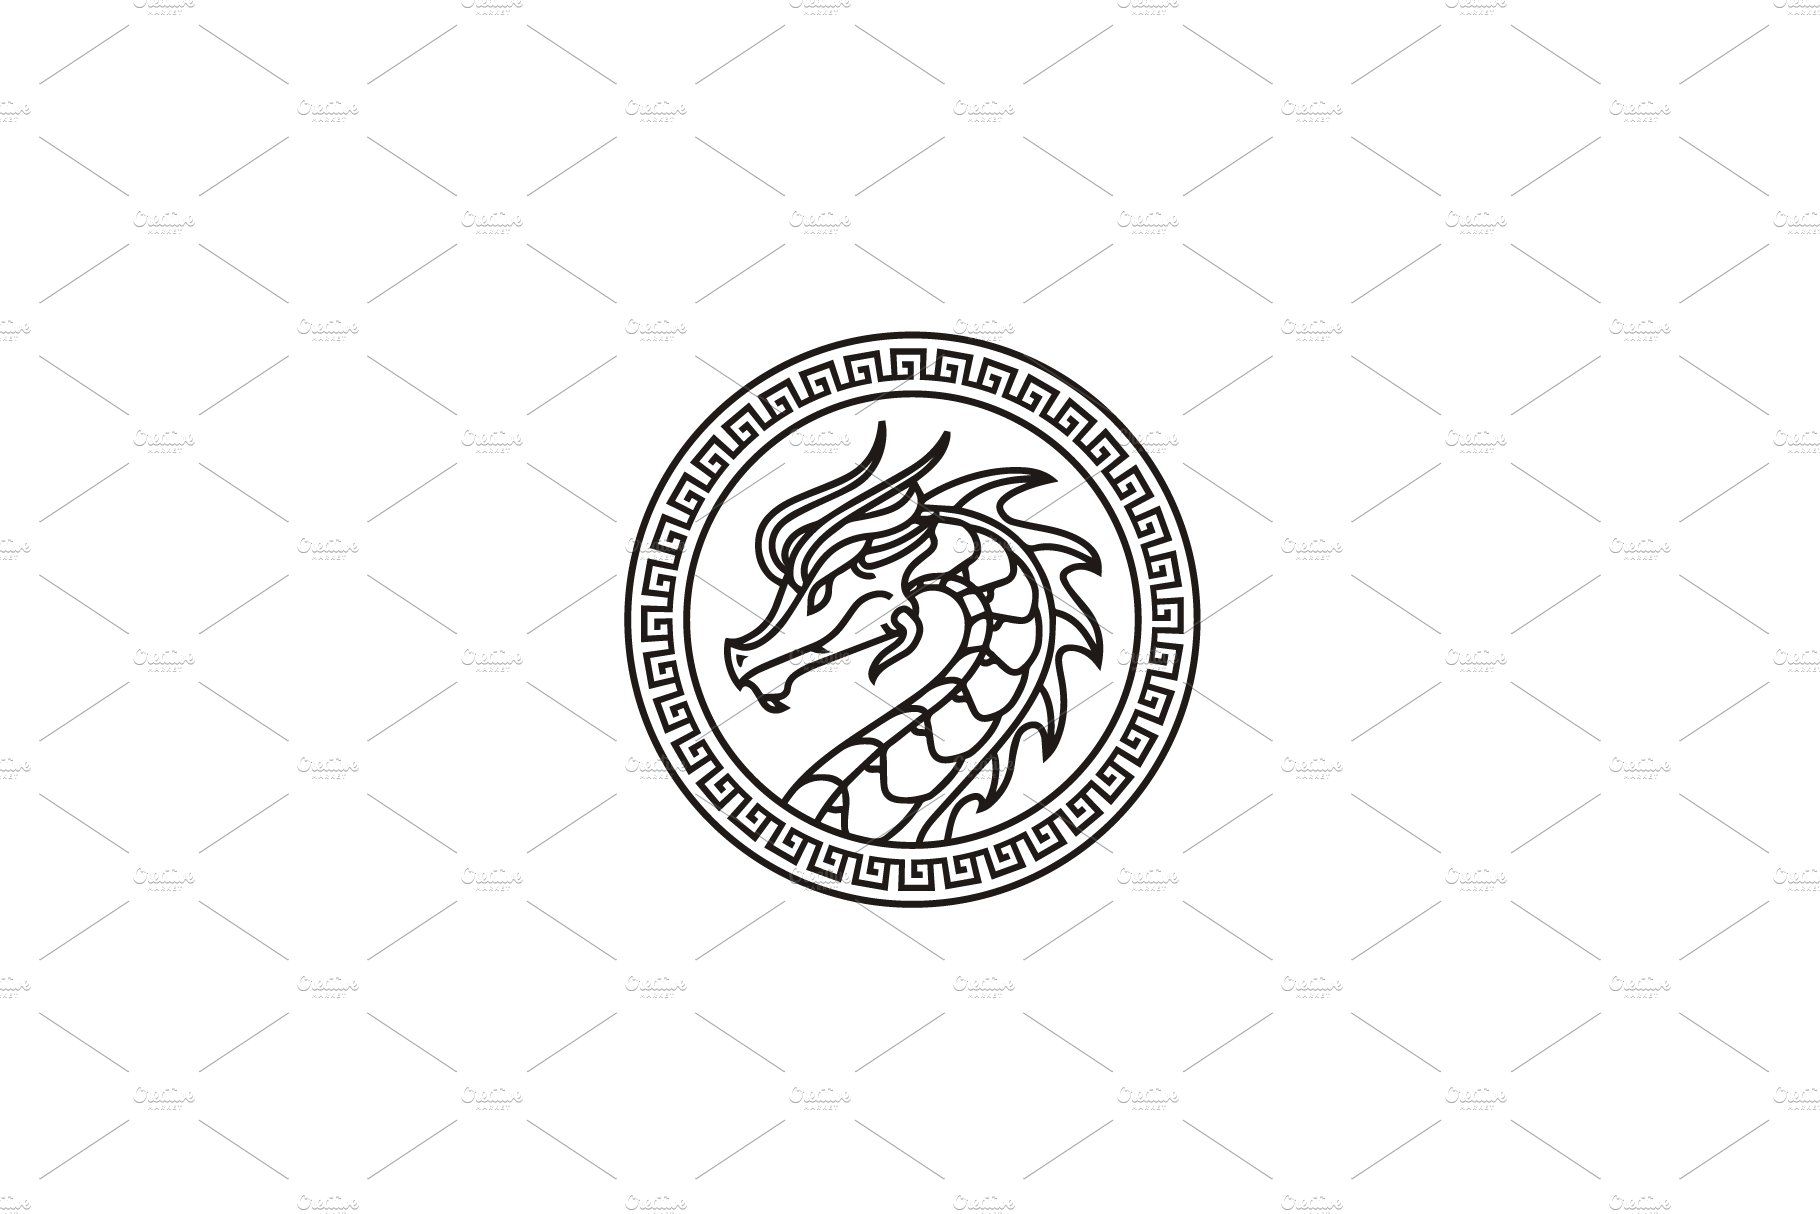 Chinese Dragon Coin Medallion Logo cover image.